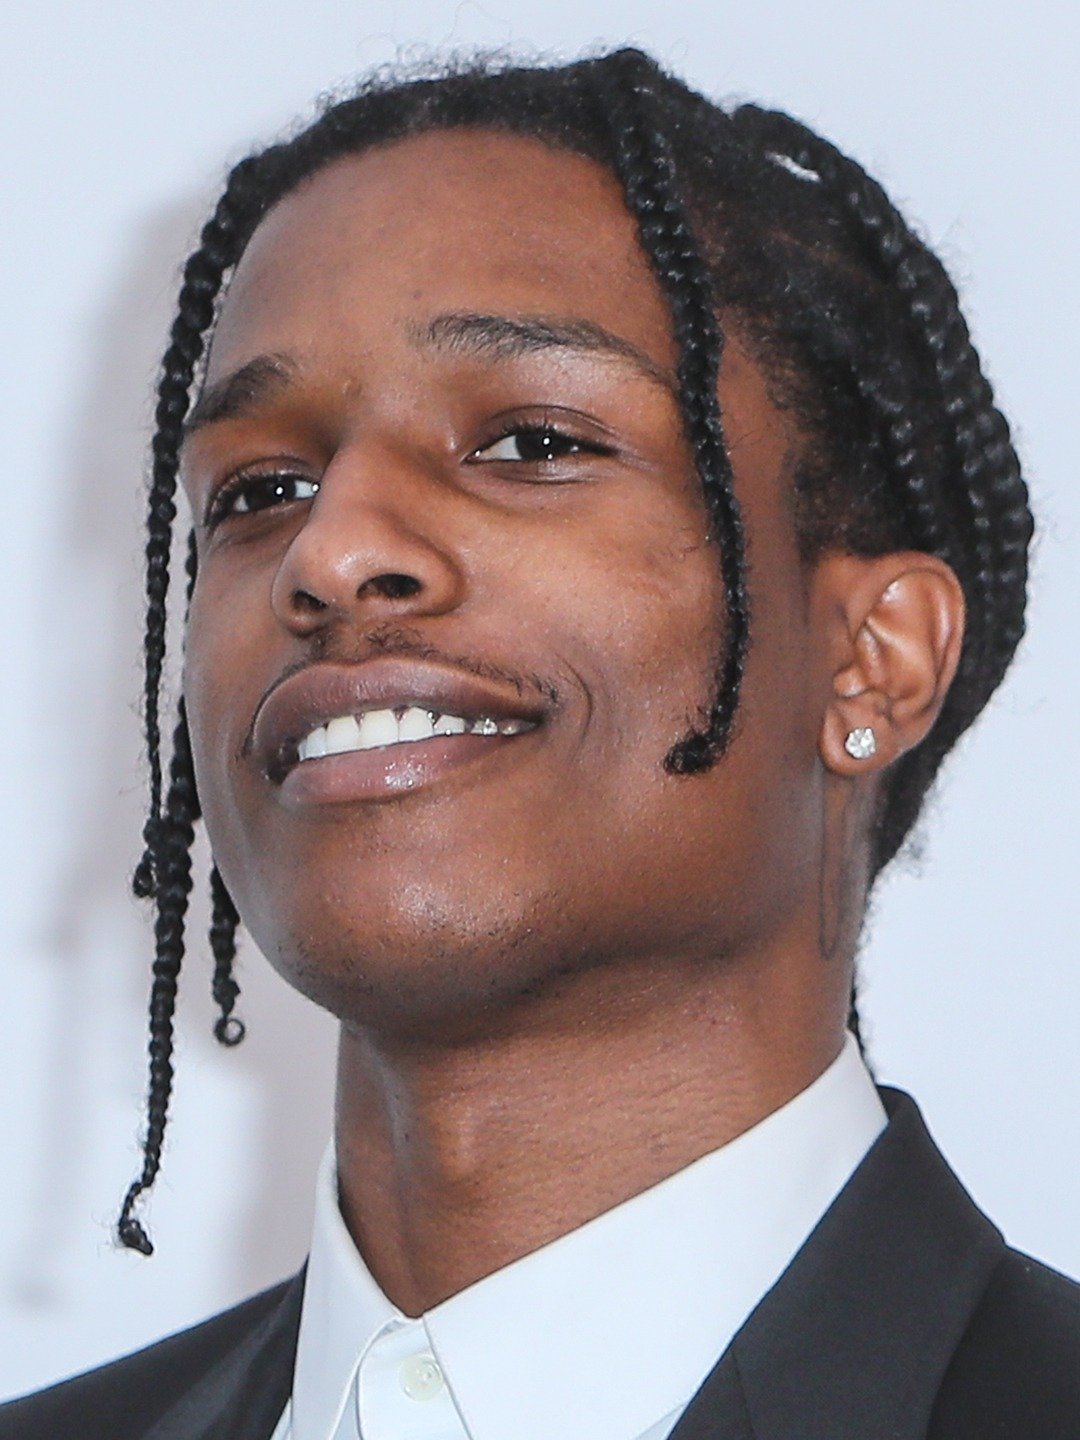 How tall is Asap Rocky?